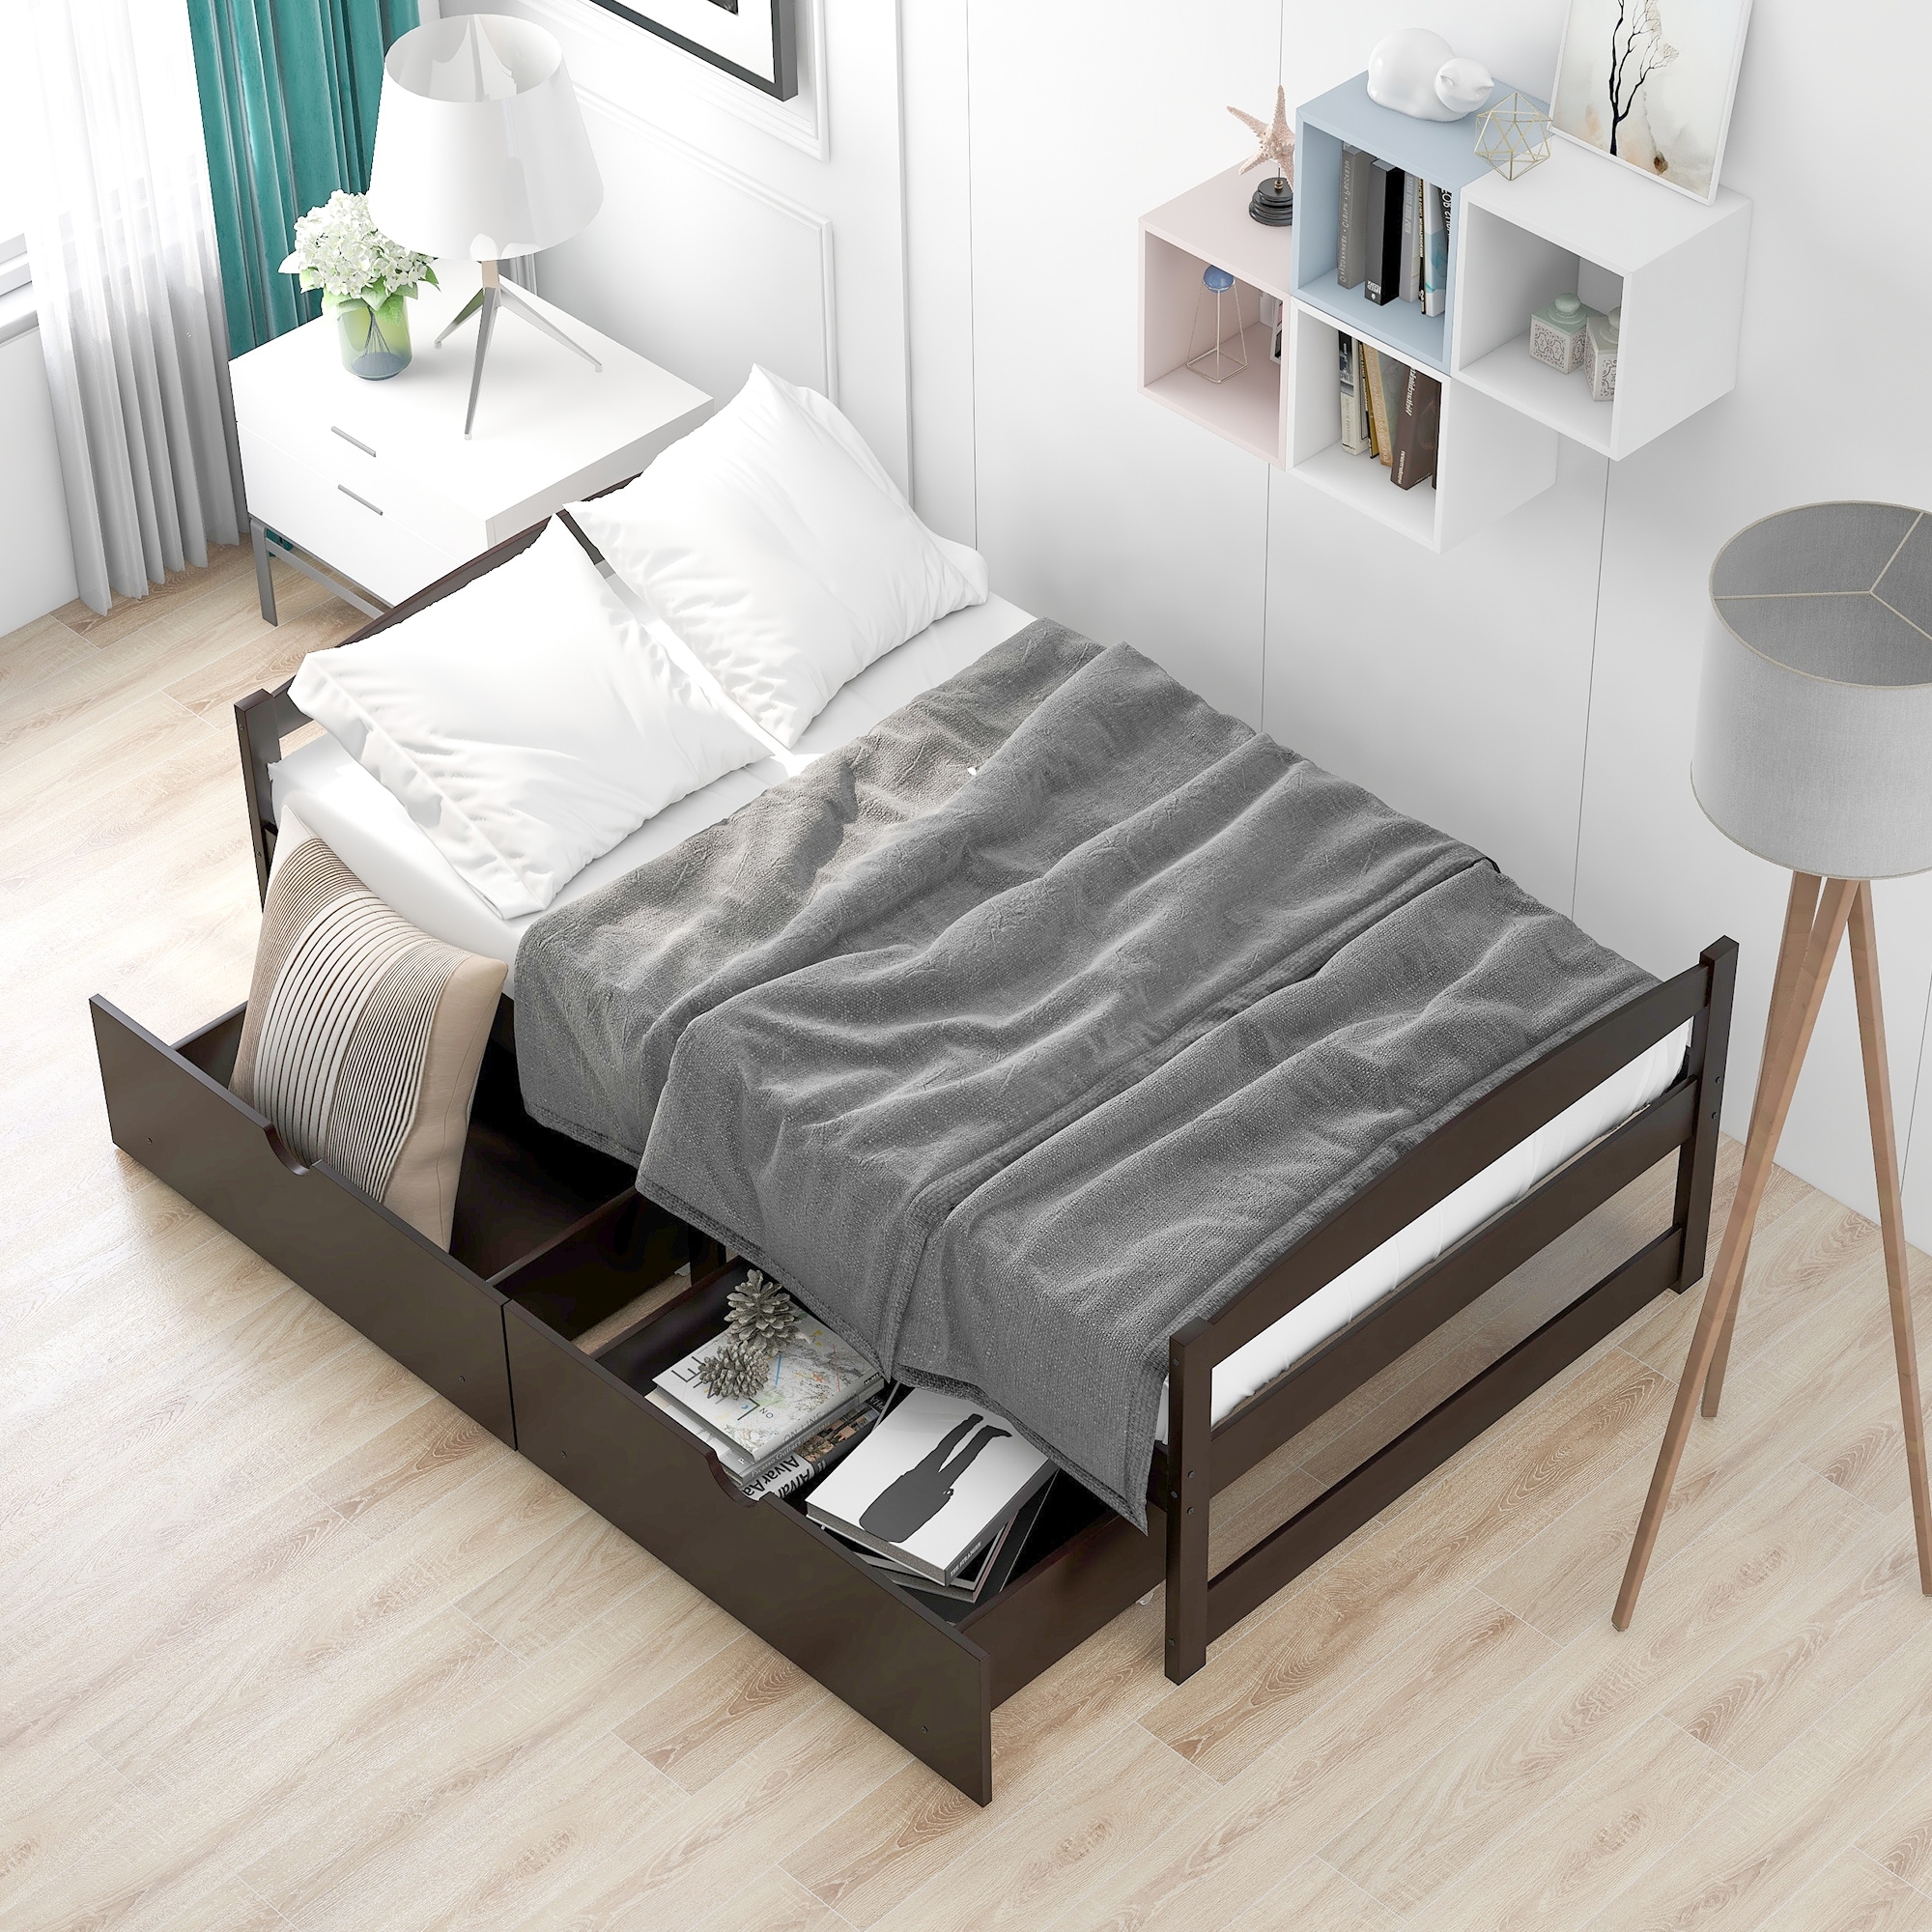 Pine Wood Twin Size Platform Bed With 2 Under-bed Storage Drawers